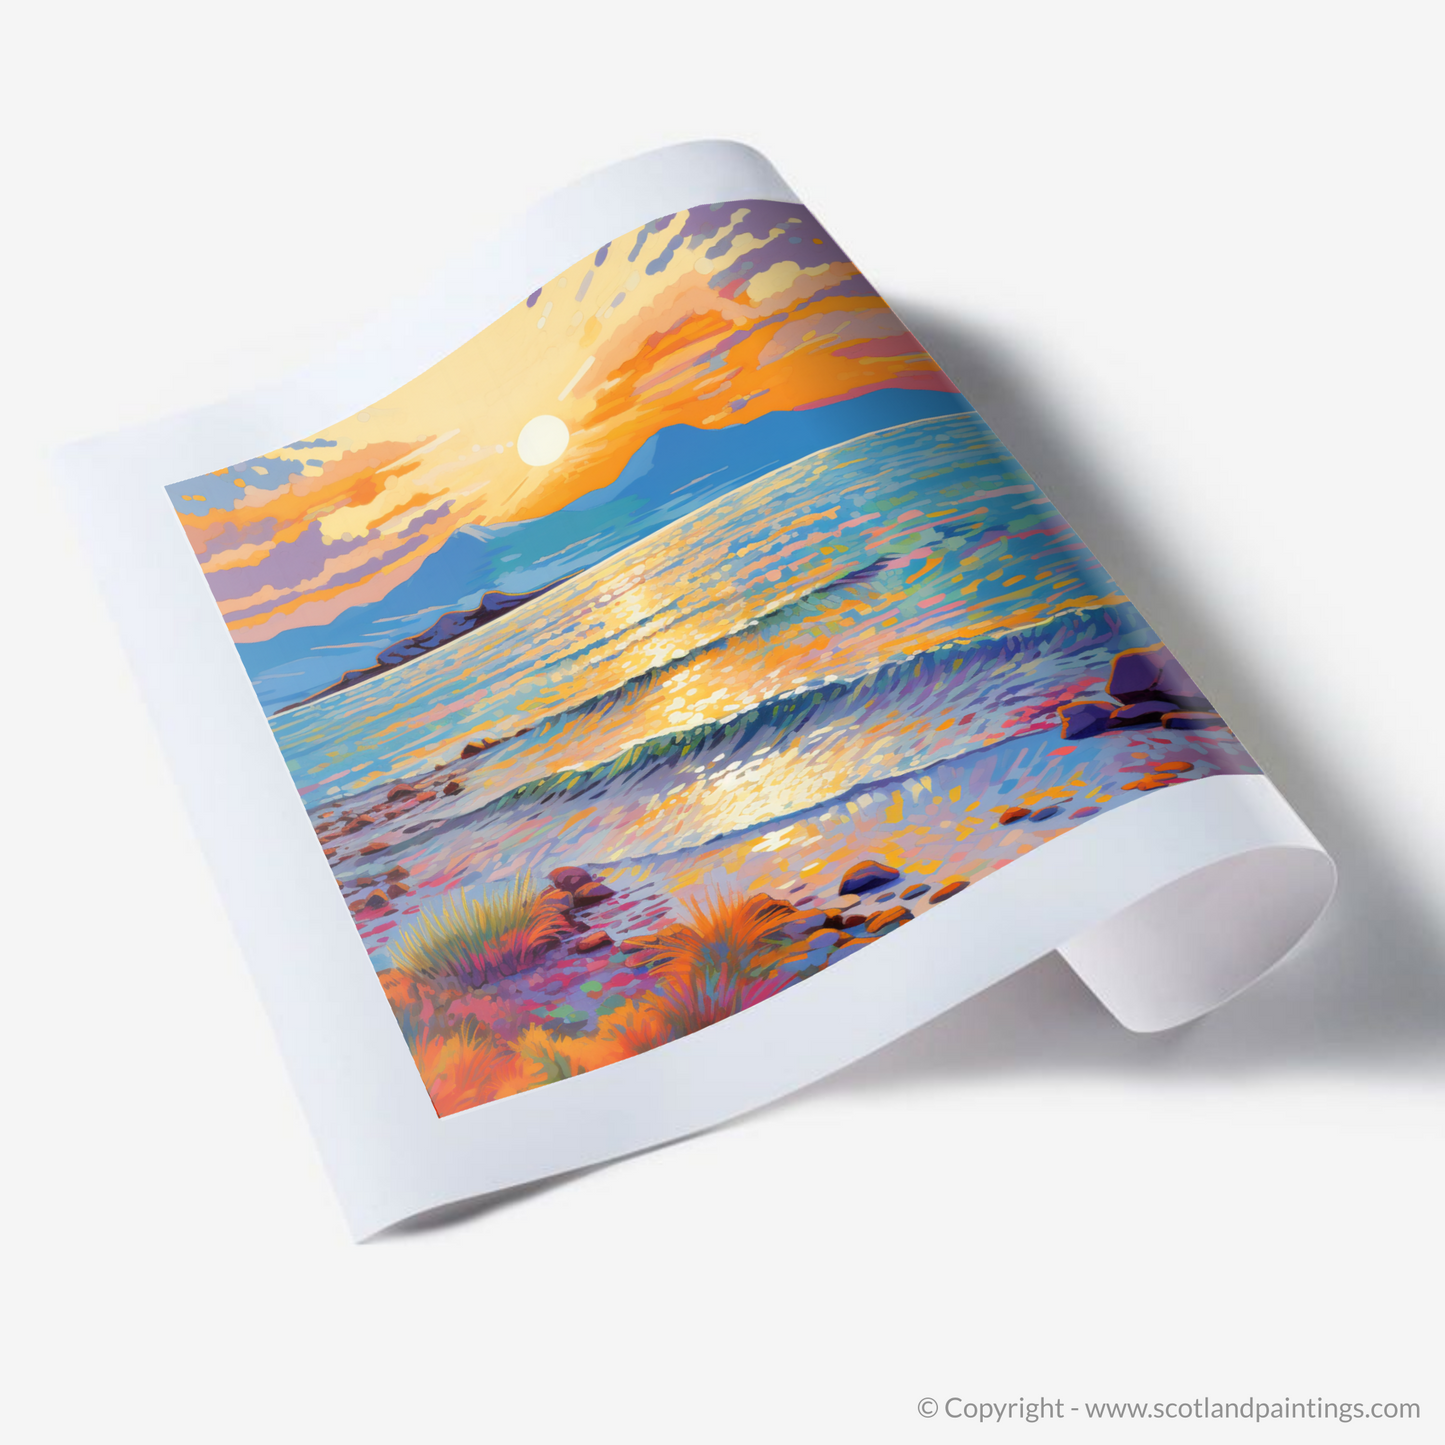 Painting and Art Print of Isle of Arran, Firth of Clyde in summer. Sunset Serenade over Isle of Arran.